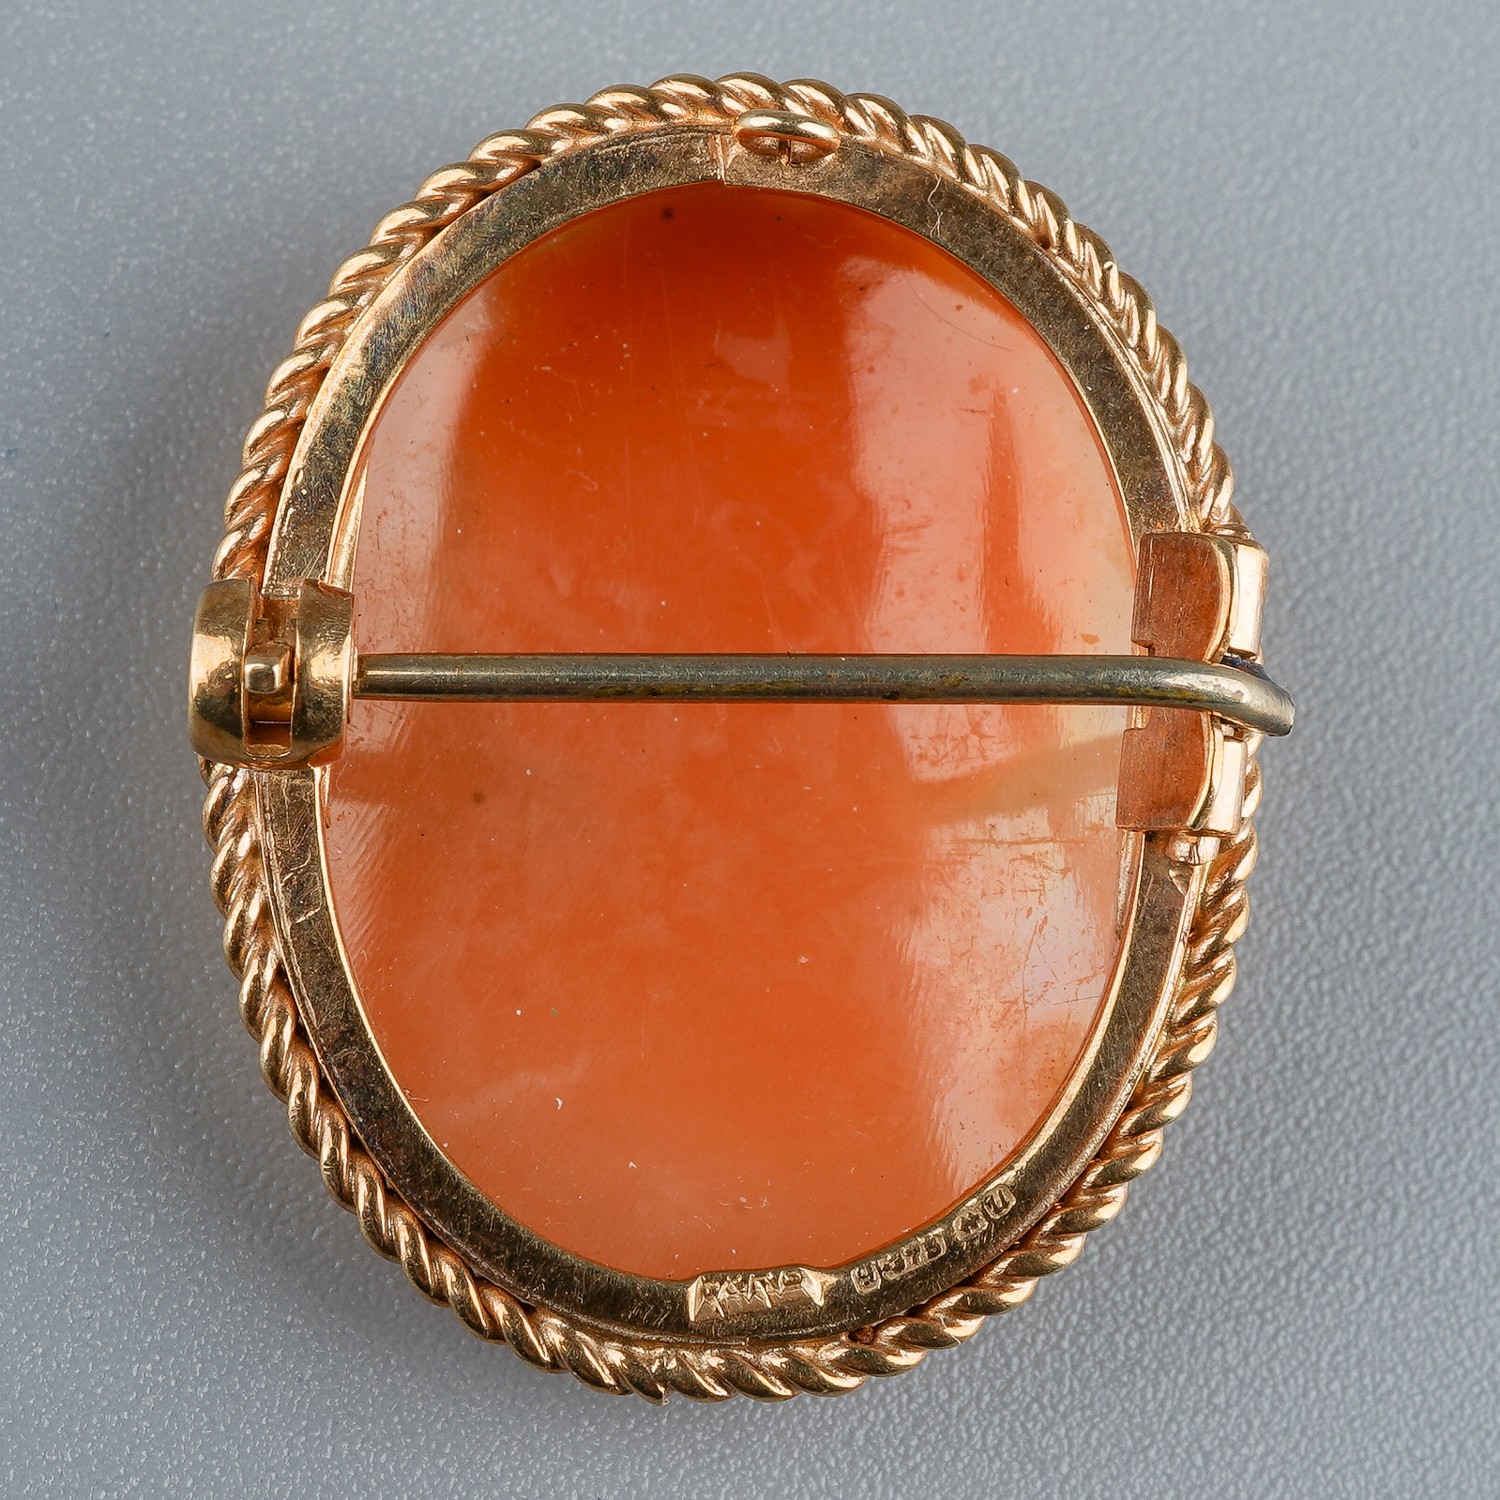 A 9ct gold and shell cameo brooch, carved depicting the portrait of a lady, in a gold mount, gross - Image 3 of 4